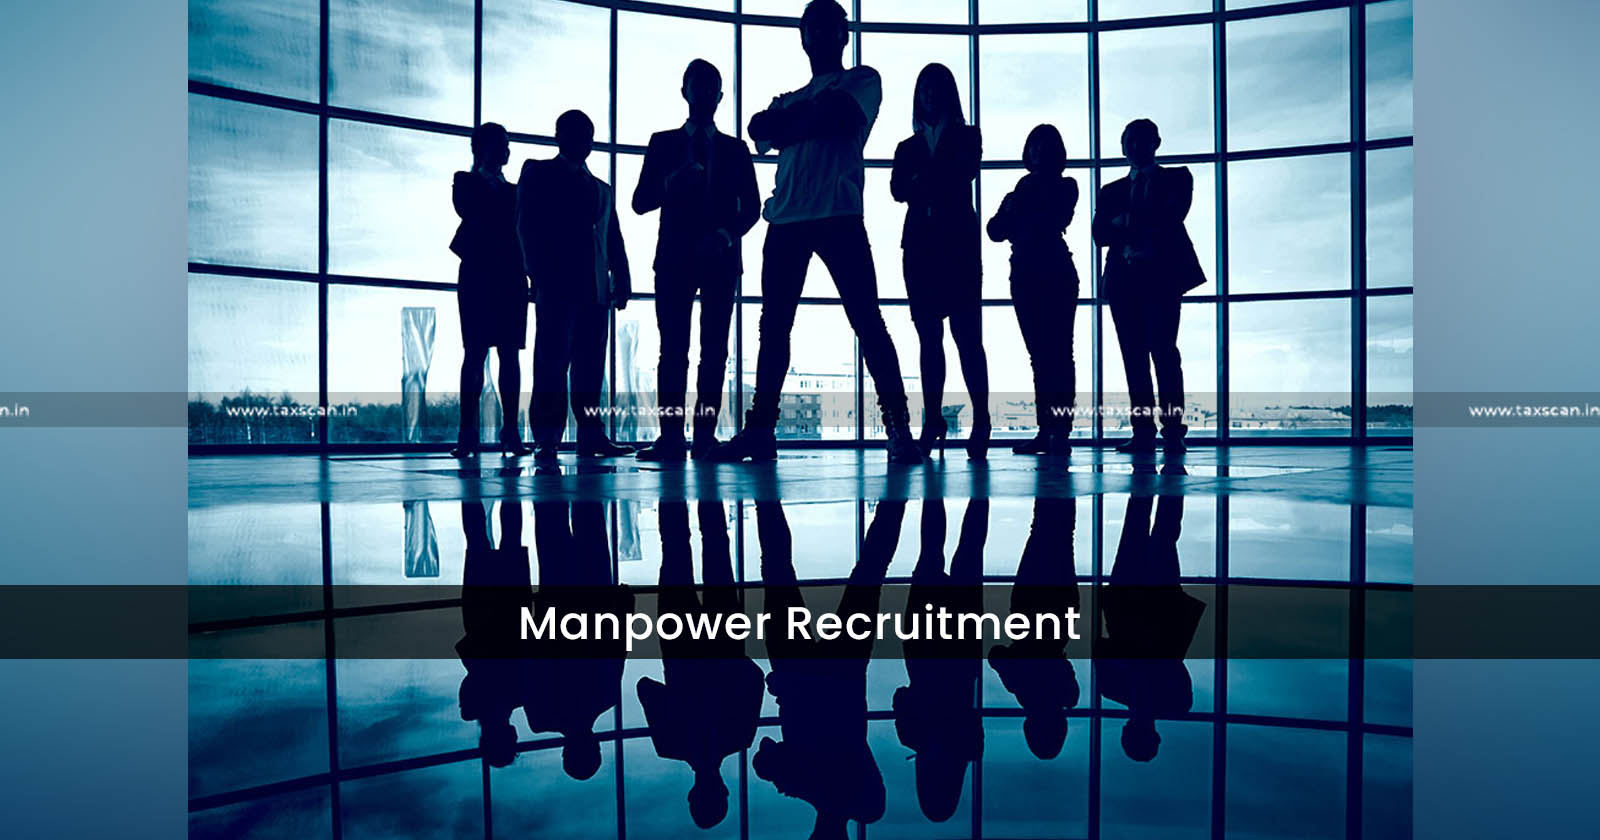 Service Tax Demand - Service Tax - Service Tax Demand on Manpower Recruitment - Manpower Recruitment - Supply Agency Service - Absence of Evidence of Supply of Manpower - CESTAT - Taxscan